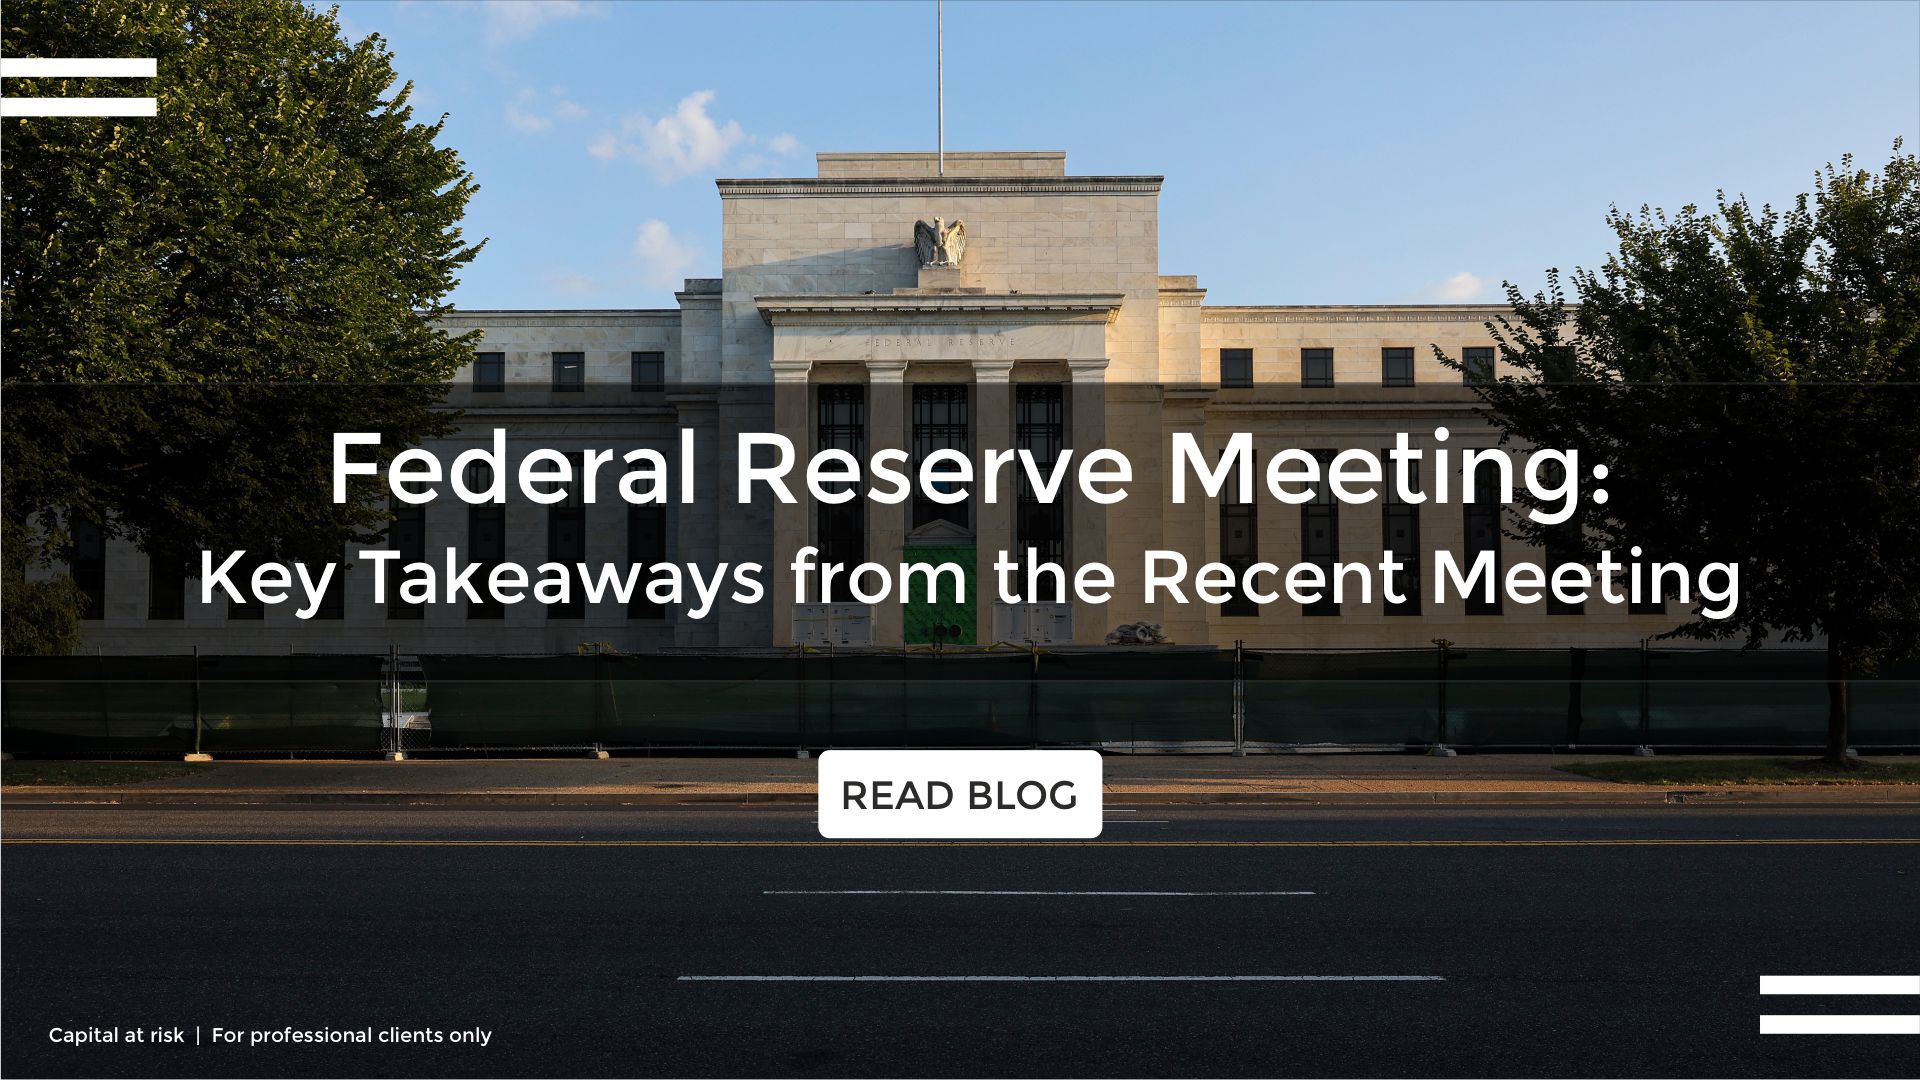 Federal Reserve Meeting: Key Takeaways from the Recent Meeting